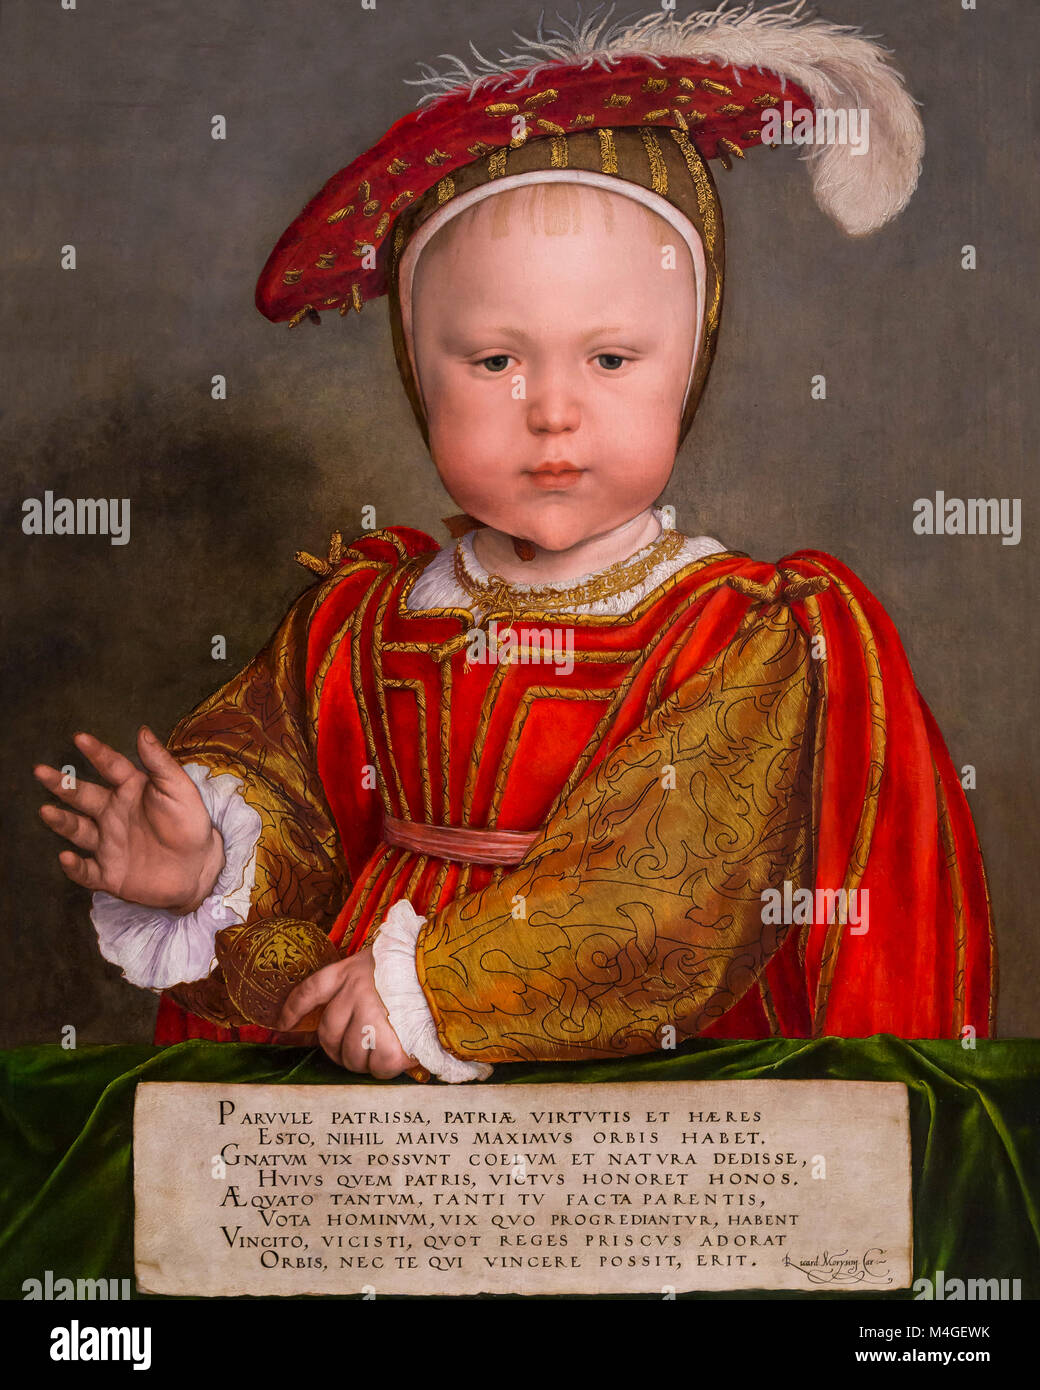 Edward VI as a Child, Hans Holbein the Younger, circa 1538, National Gallery of Art, Washington DC, USA, North America Stock Photo